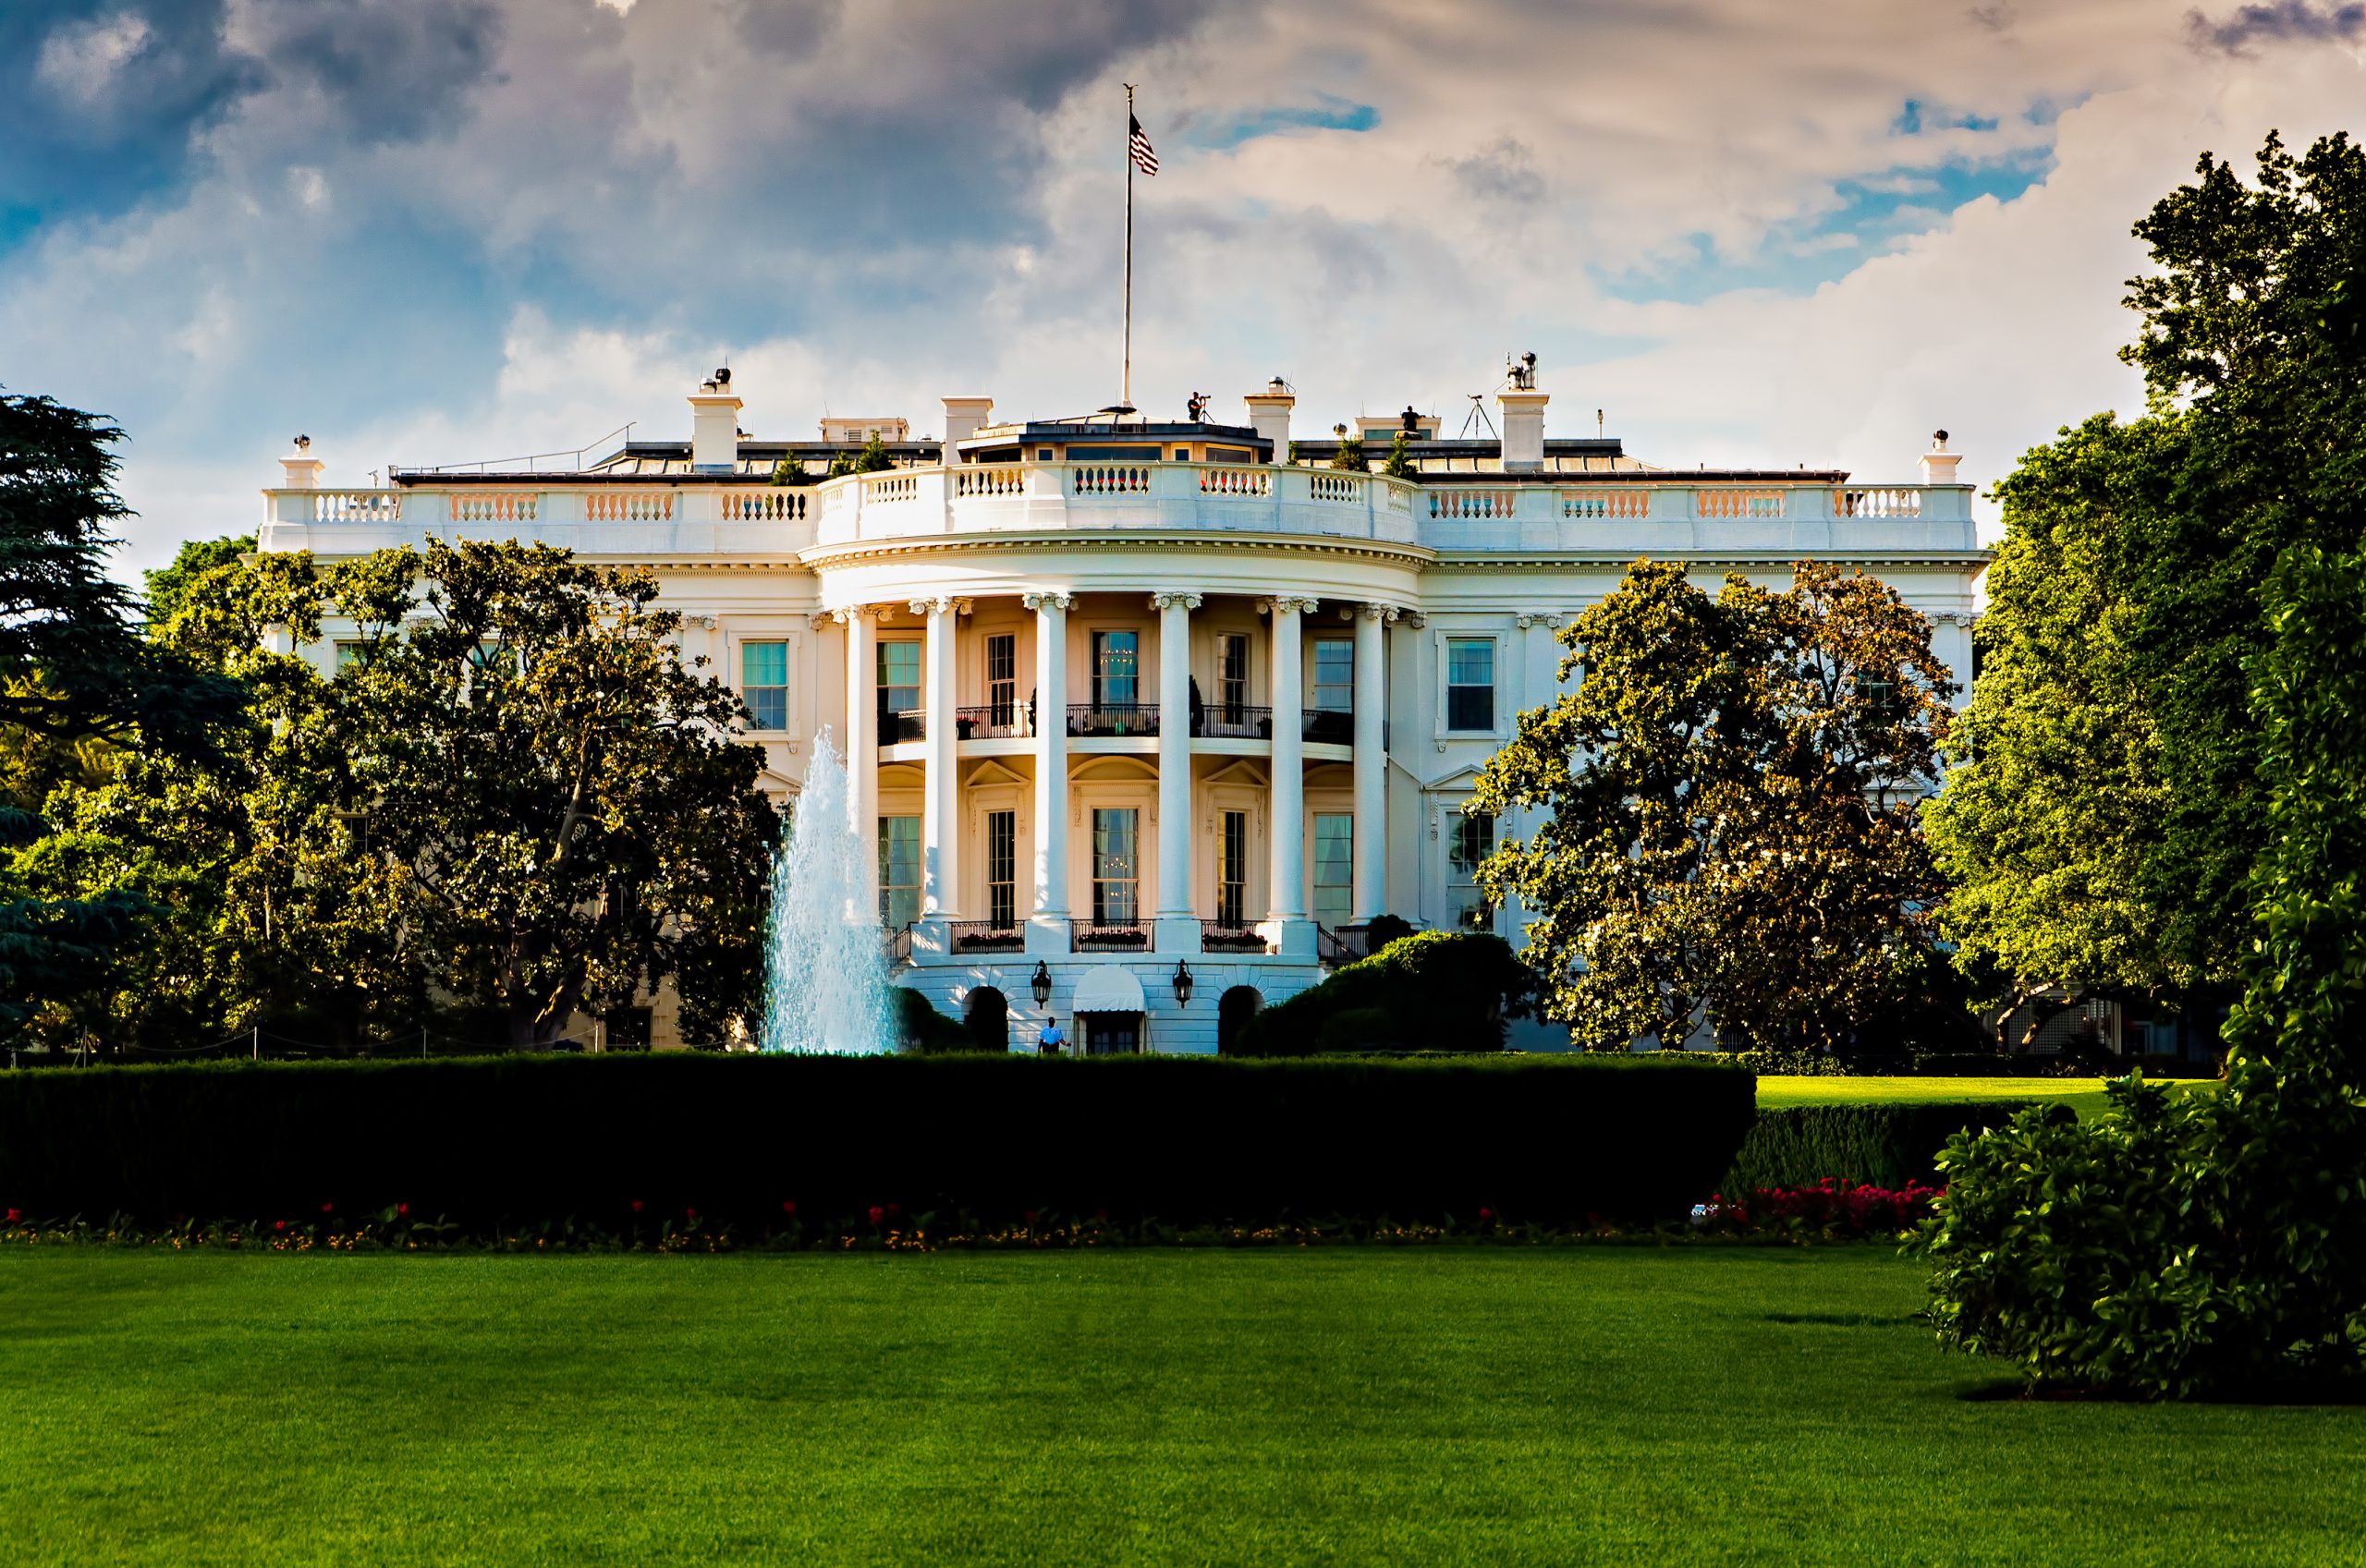 Image of the White House for our article on 10 U.S. Presidents Without College Degree Credentials